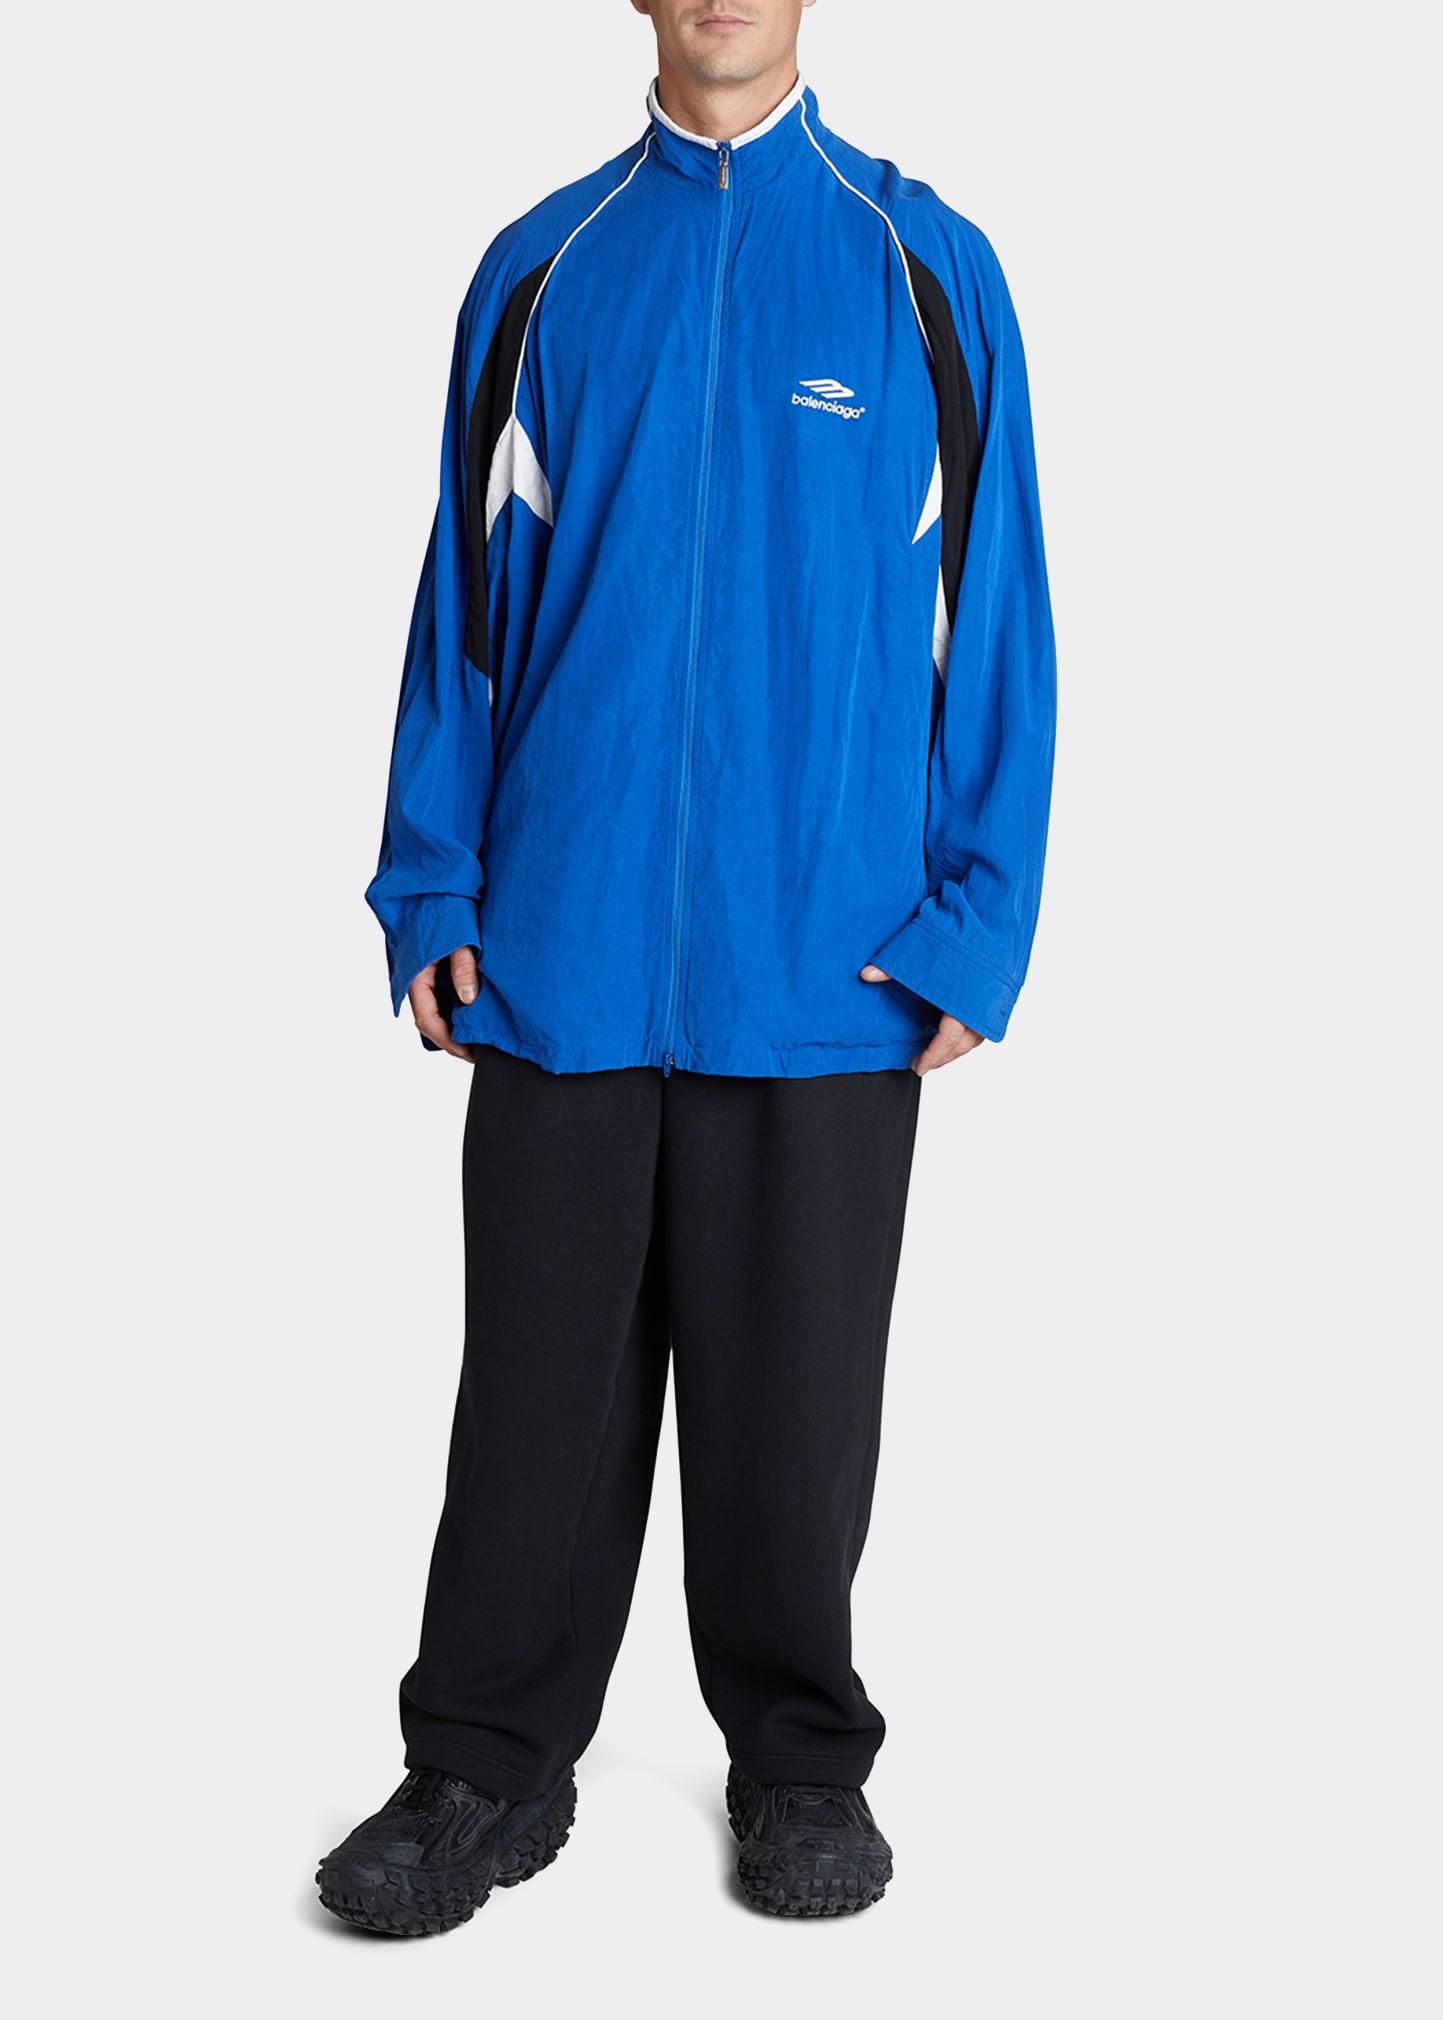 Balenciaga Oversized Track Suit Jacket in Blue for Men | Lyst